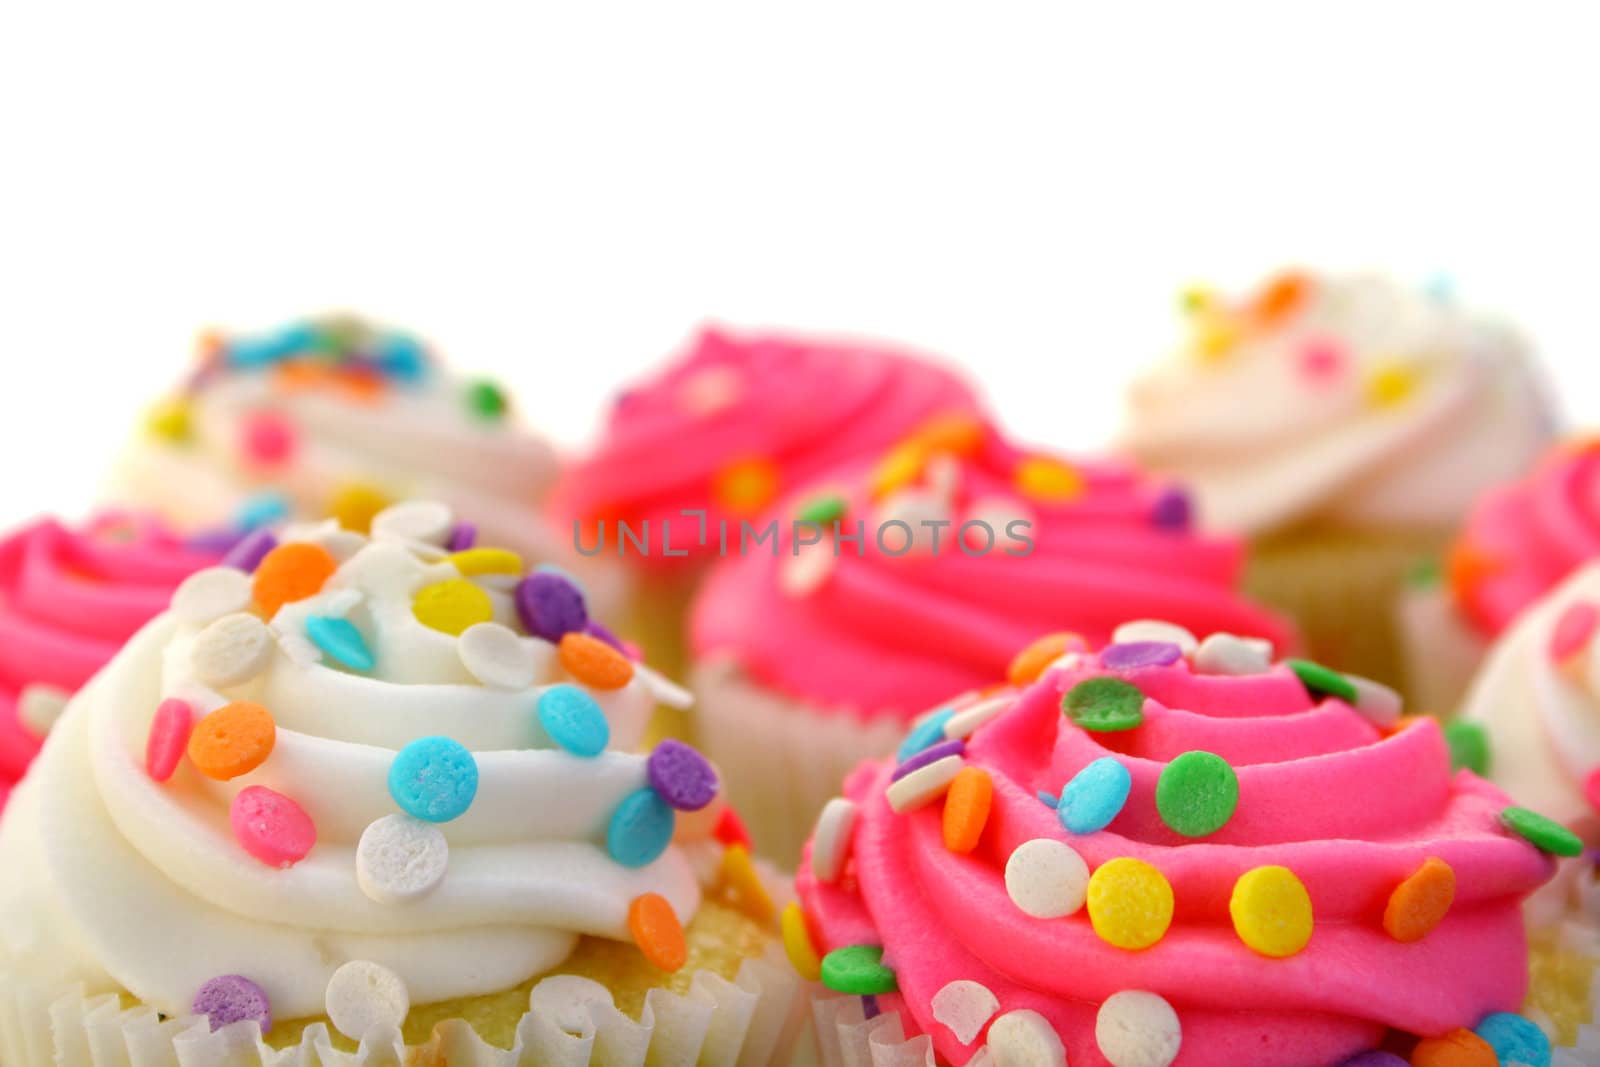 pink and white cupcakes with sprinkles

